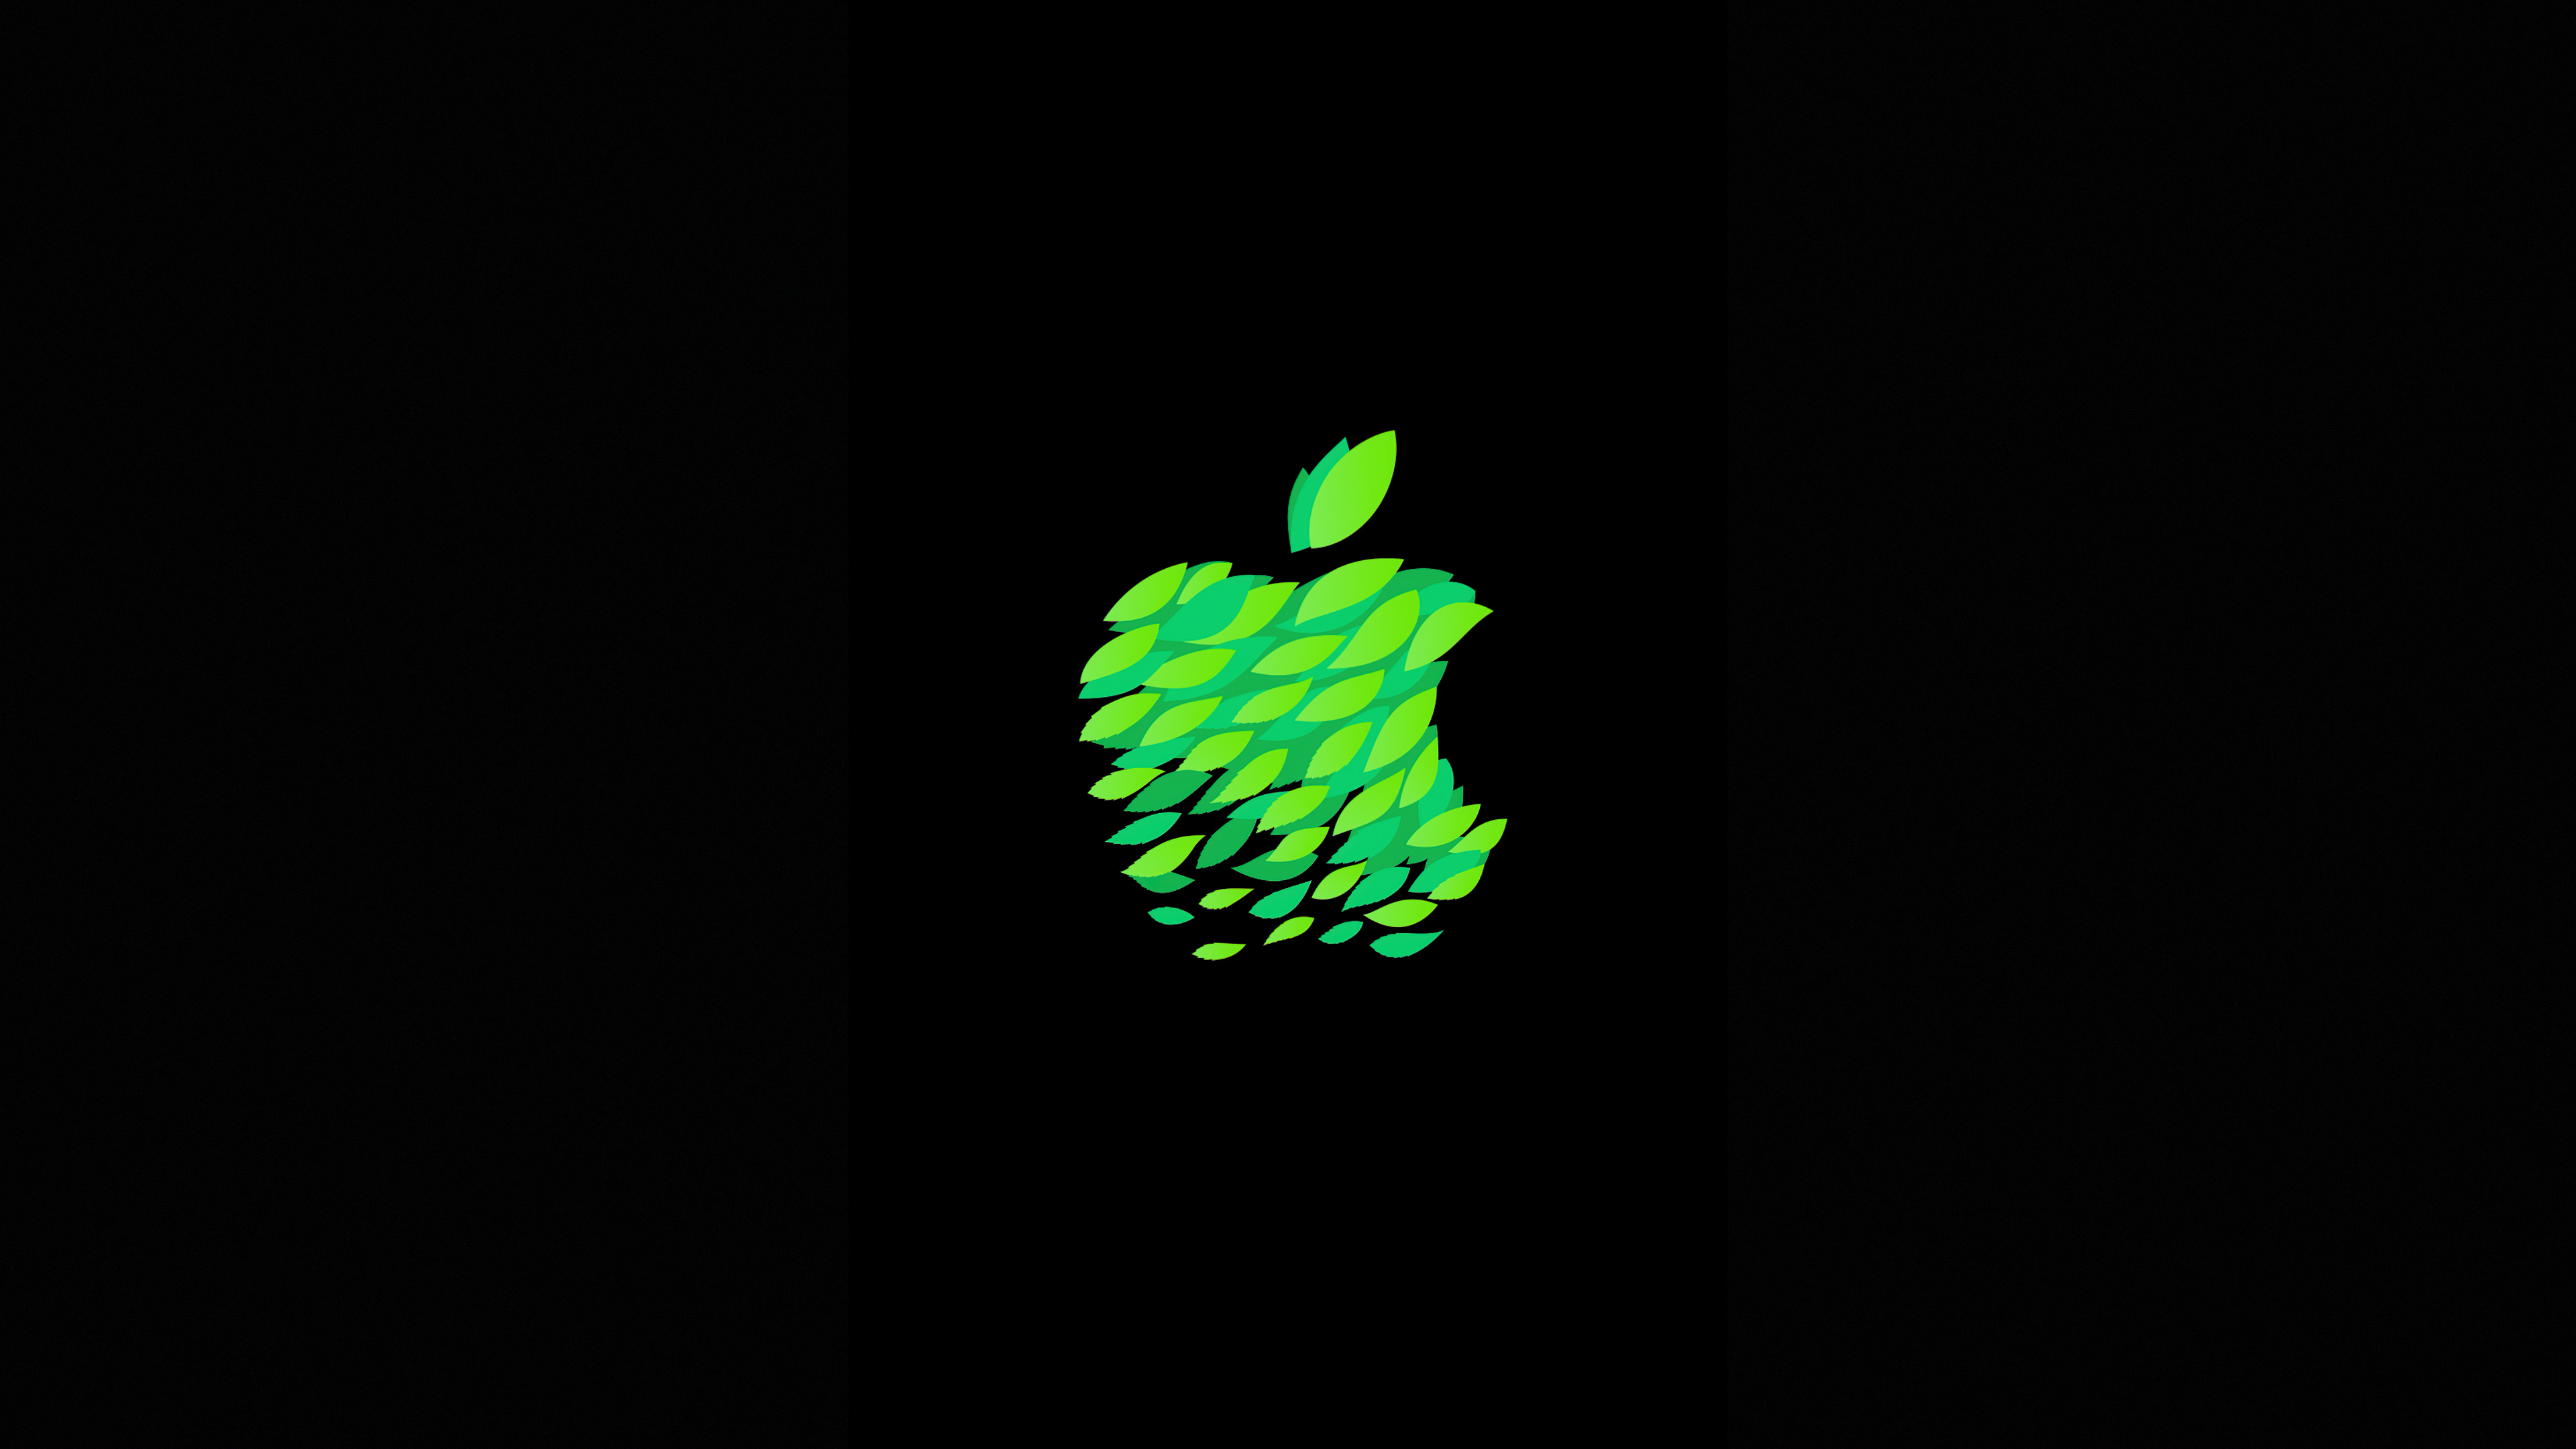 1440x2960 Green Black Apple Logo 4k Samsung Galaxy Note 9 8 S9 S8 S8 Qhd Hd 4k Wallpapers Images Backgrounds Photos And Pictures